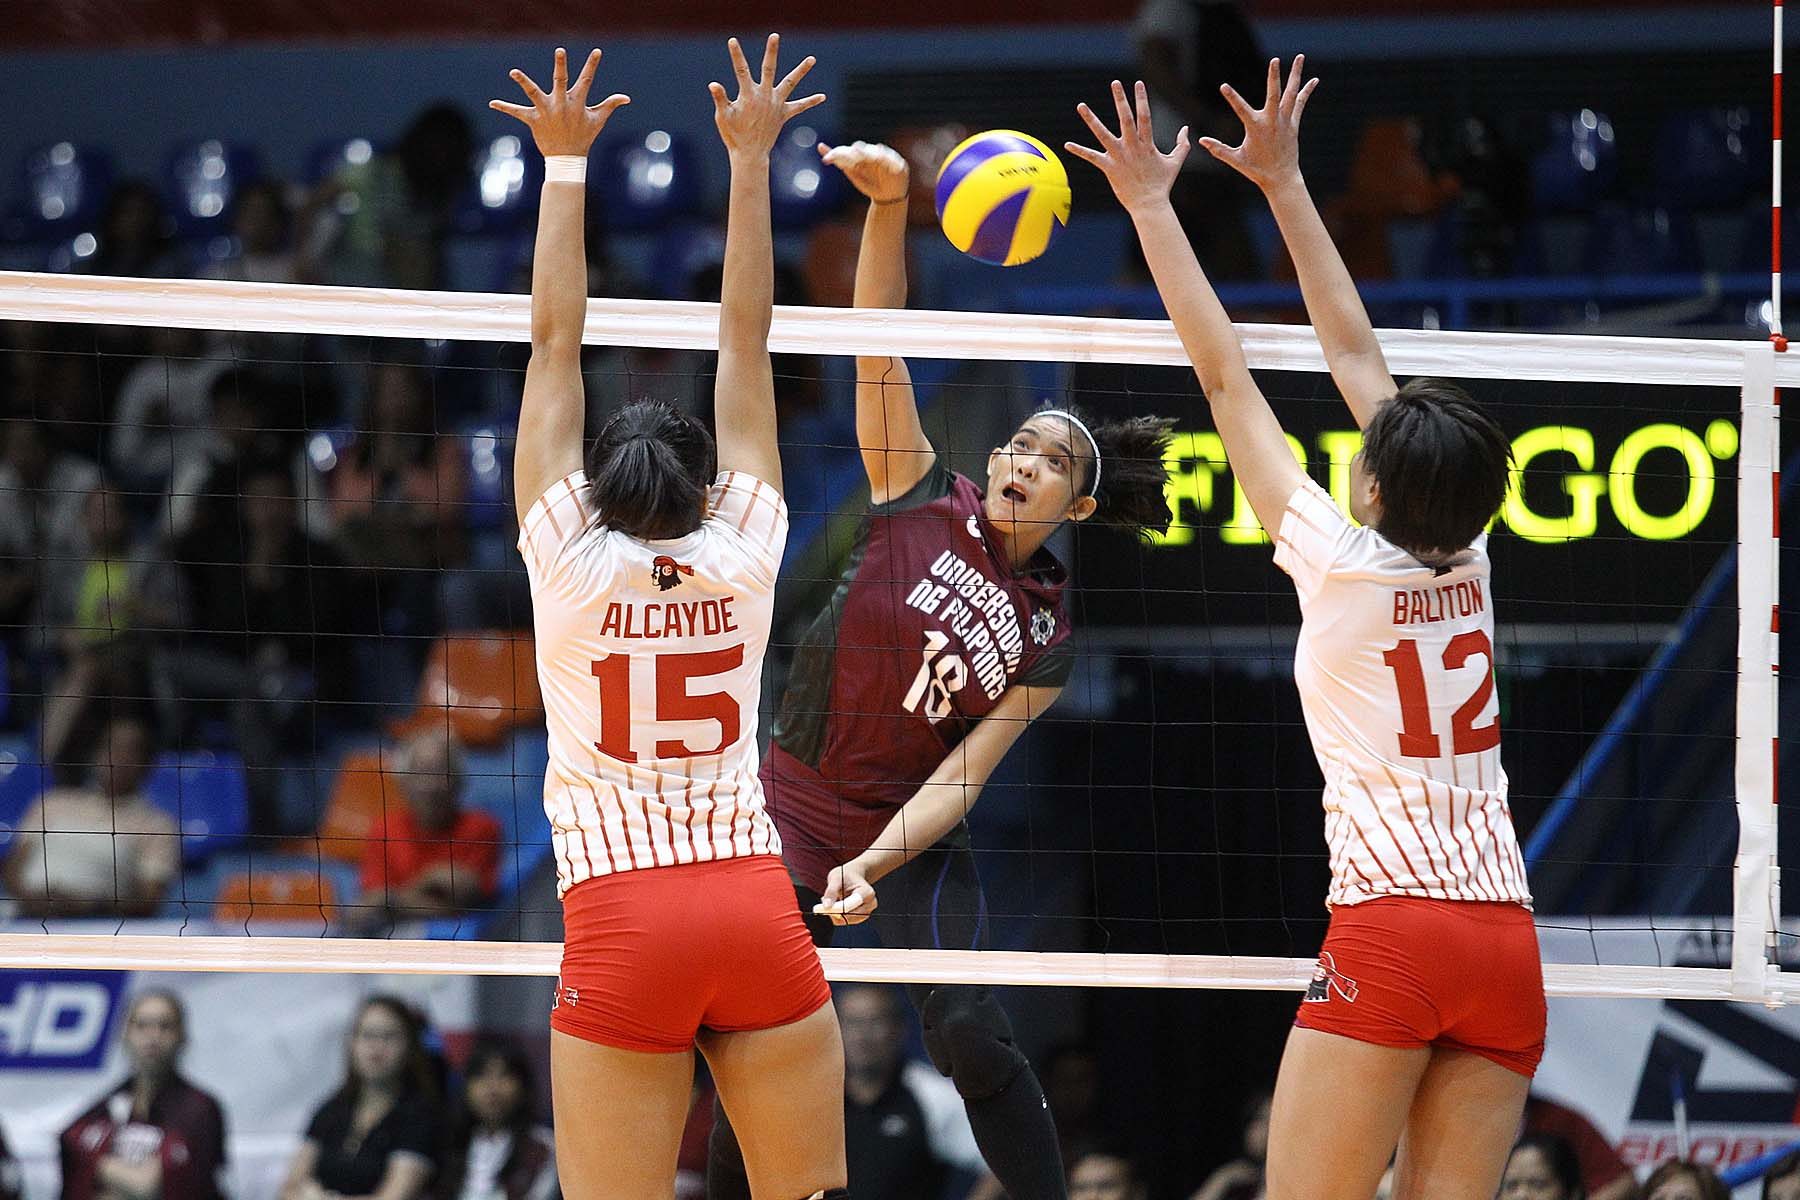 UP Lady Maroons end slump, defeat UE in 4 sets